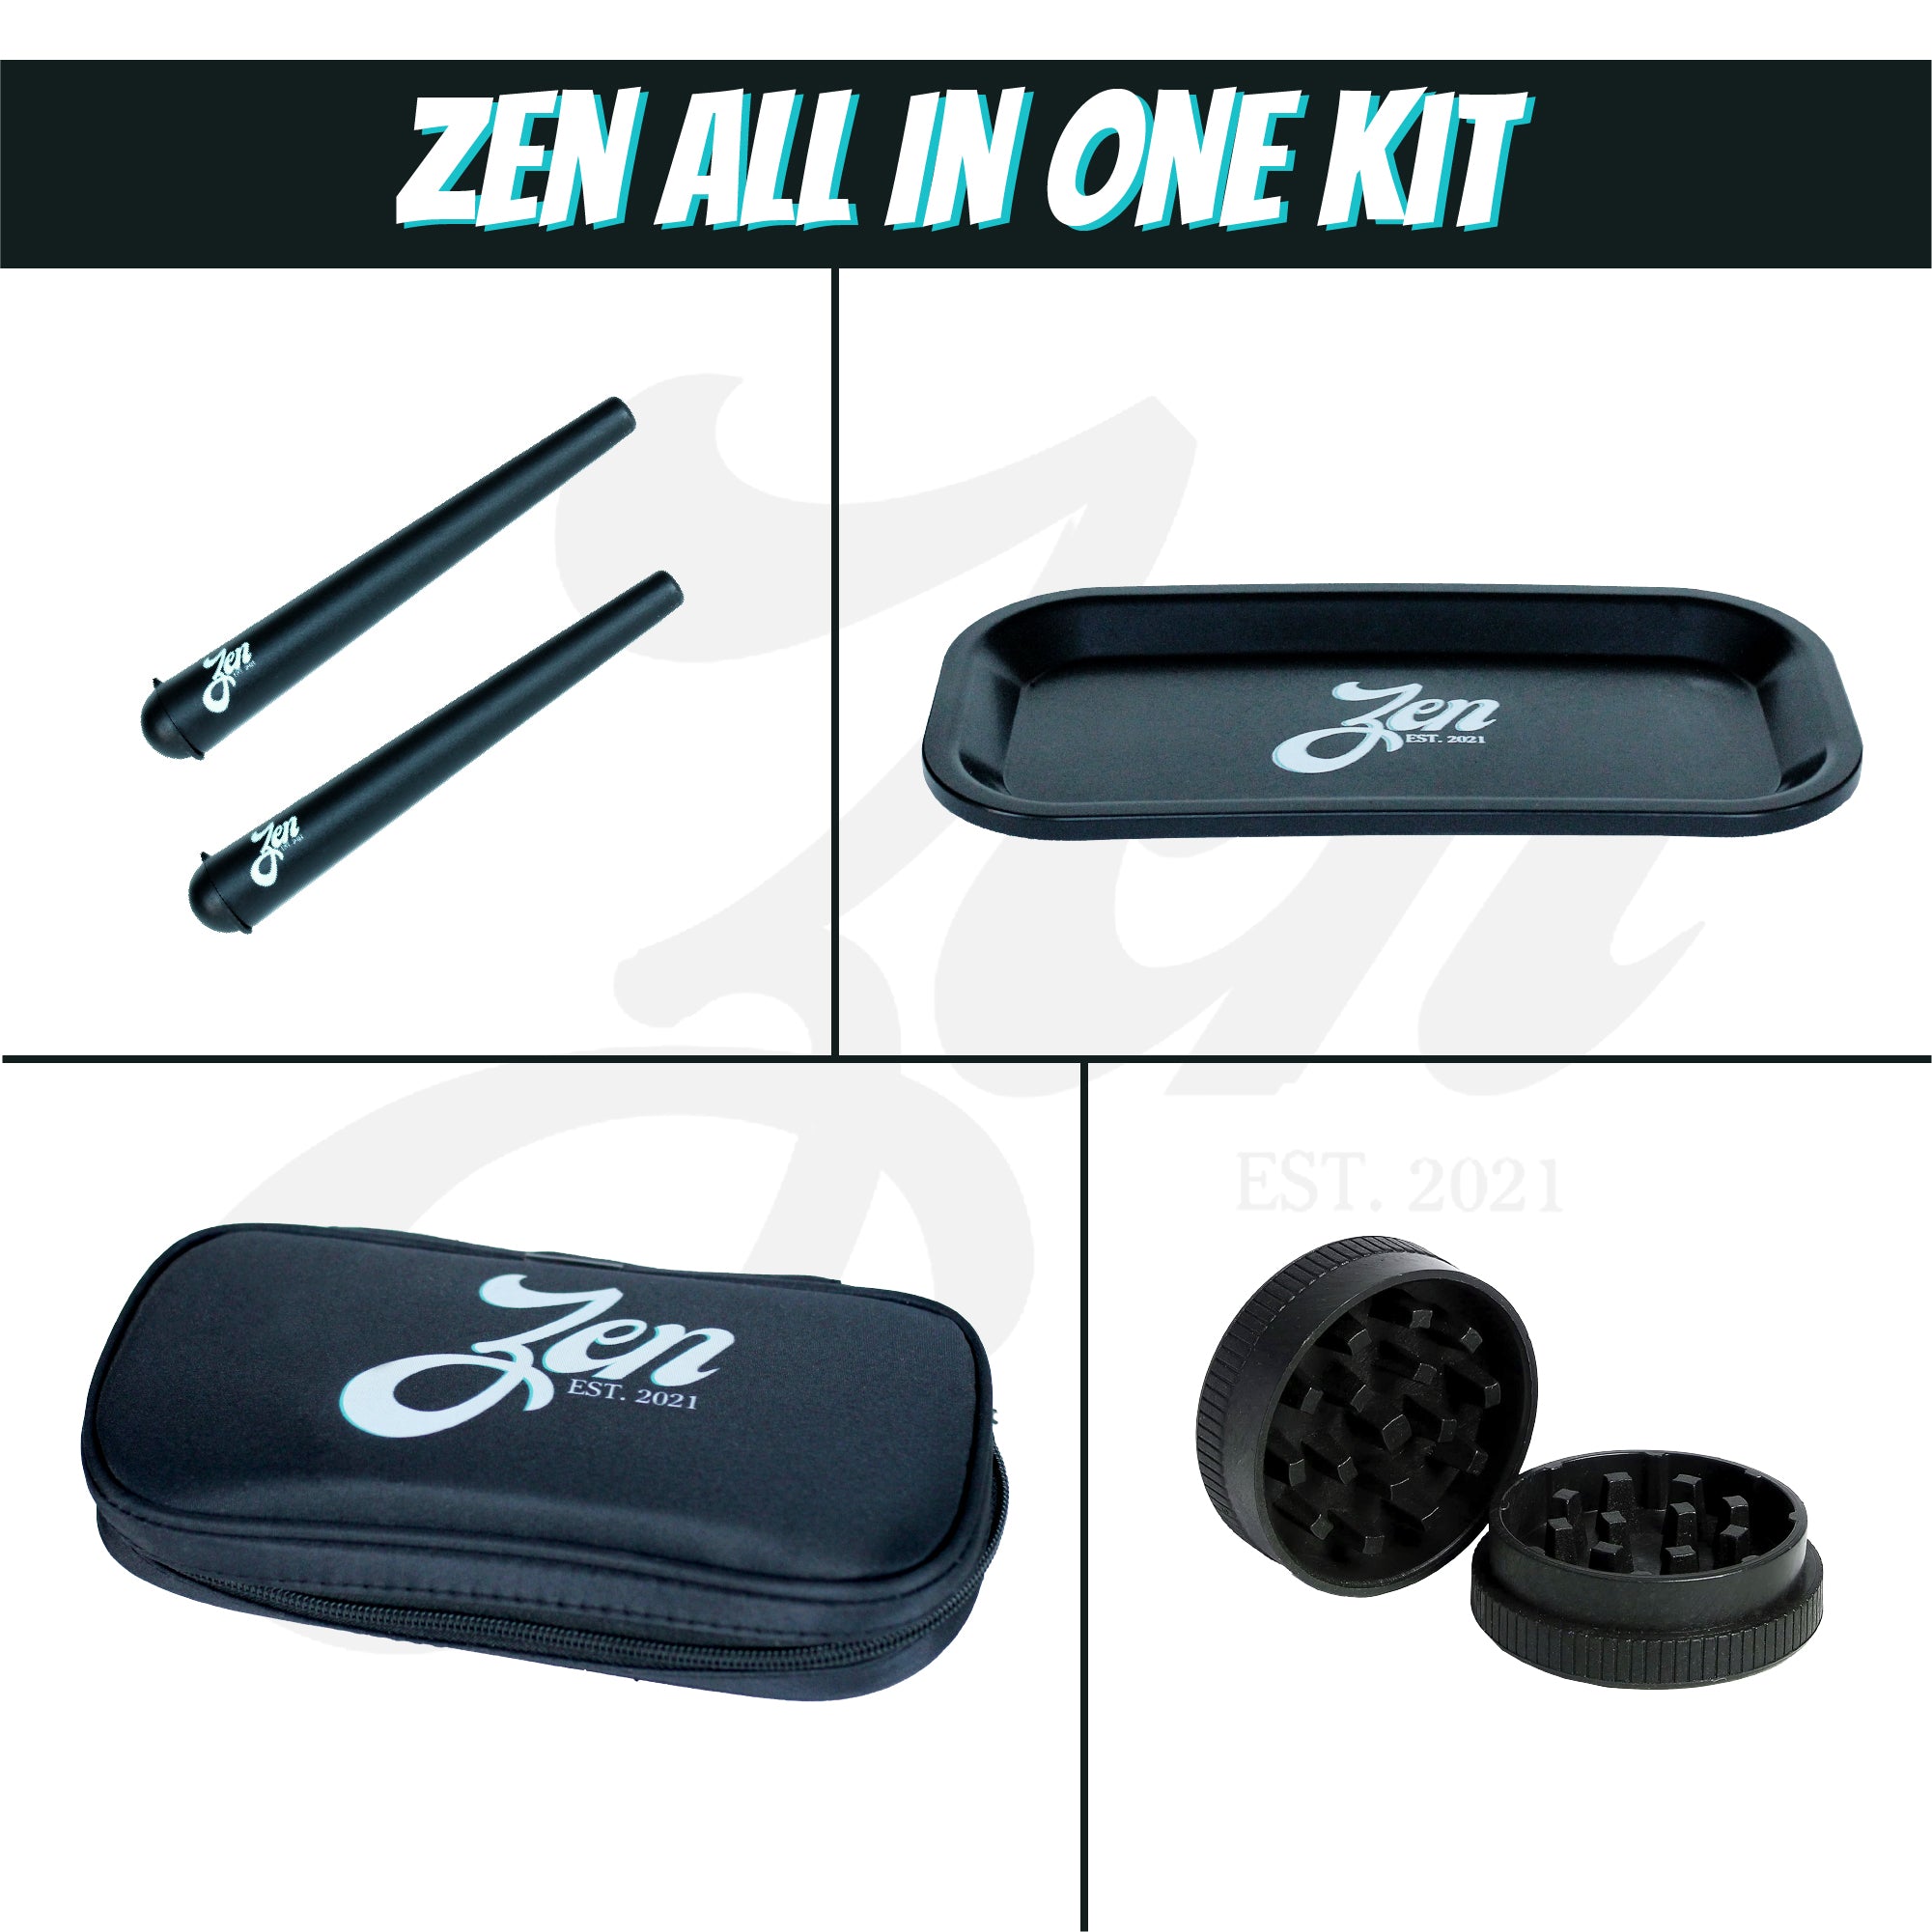 Zen Black Travel Pouch Kit - Large Smell proof, Portable Storage Case - Stash Box with Zipper Closure - Accessories Included